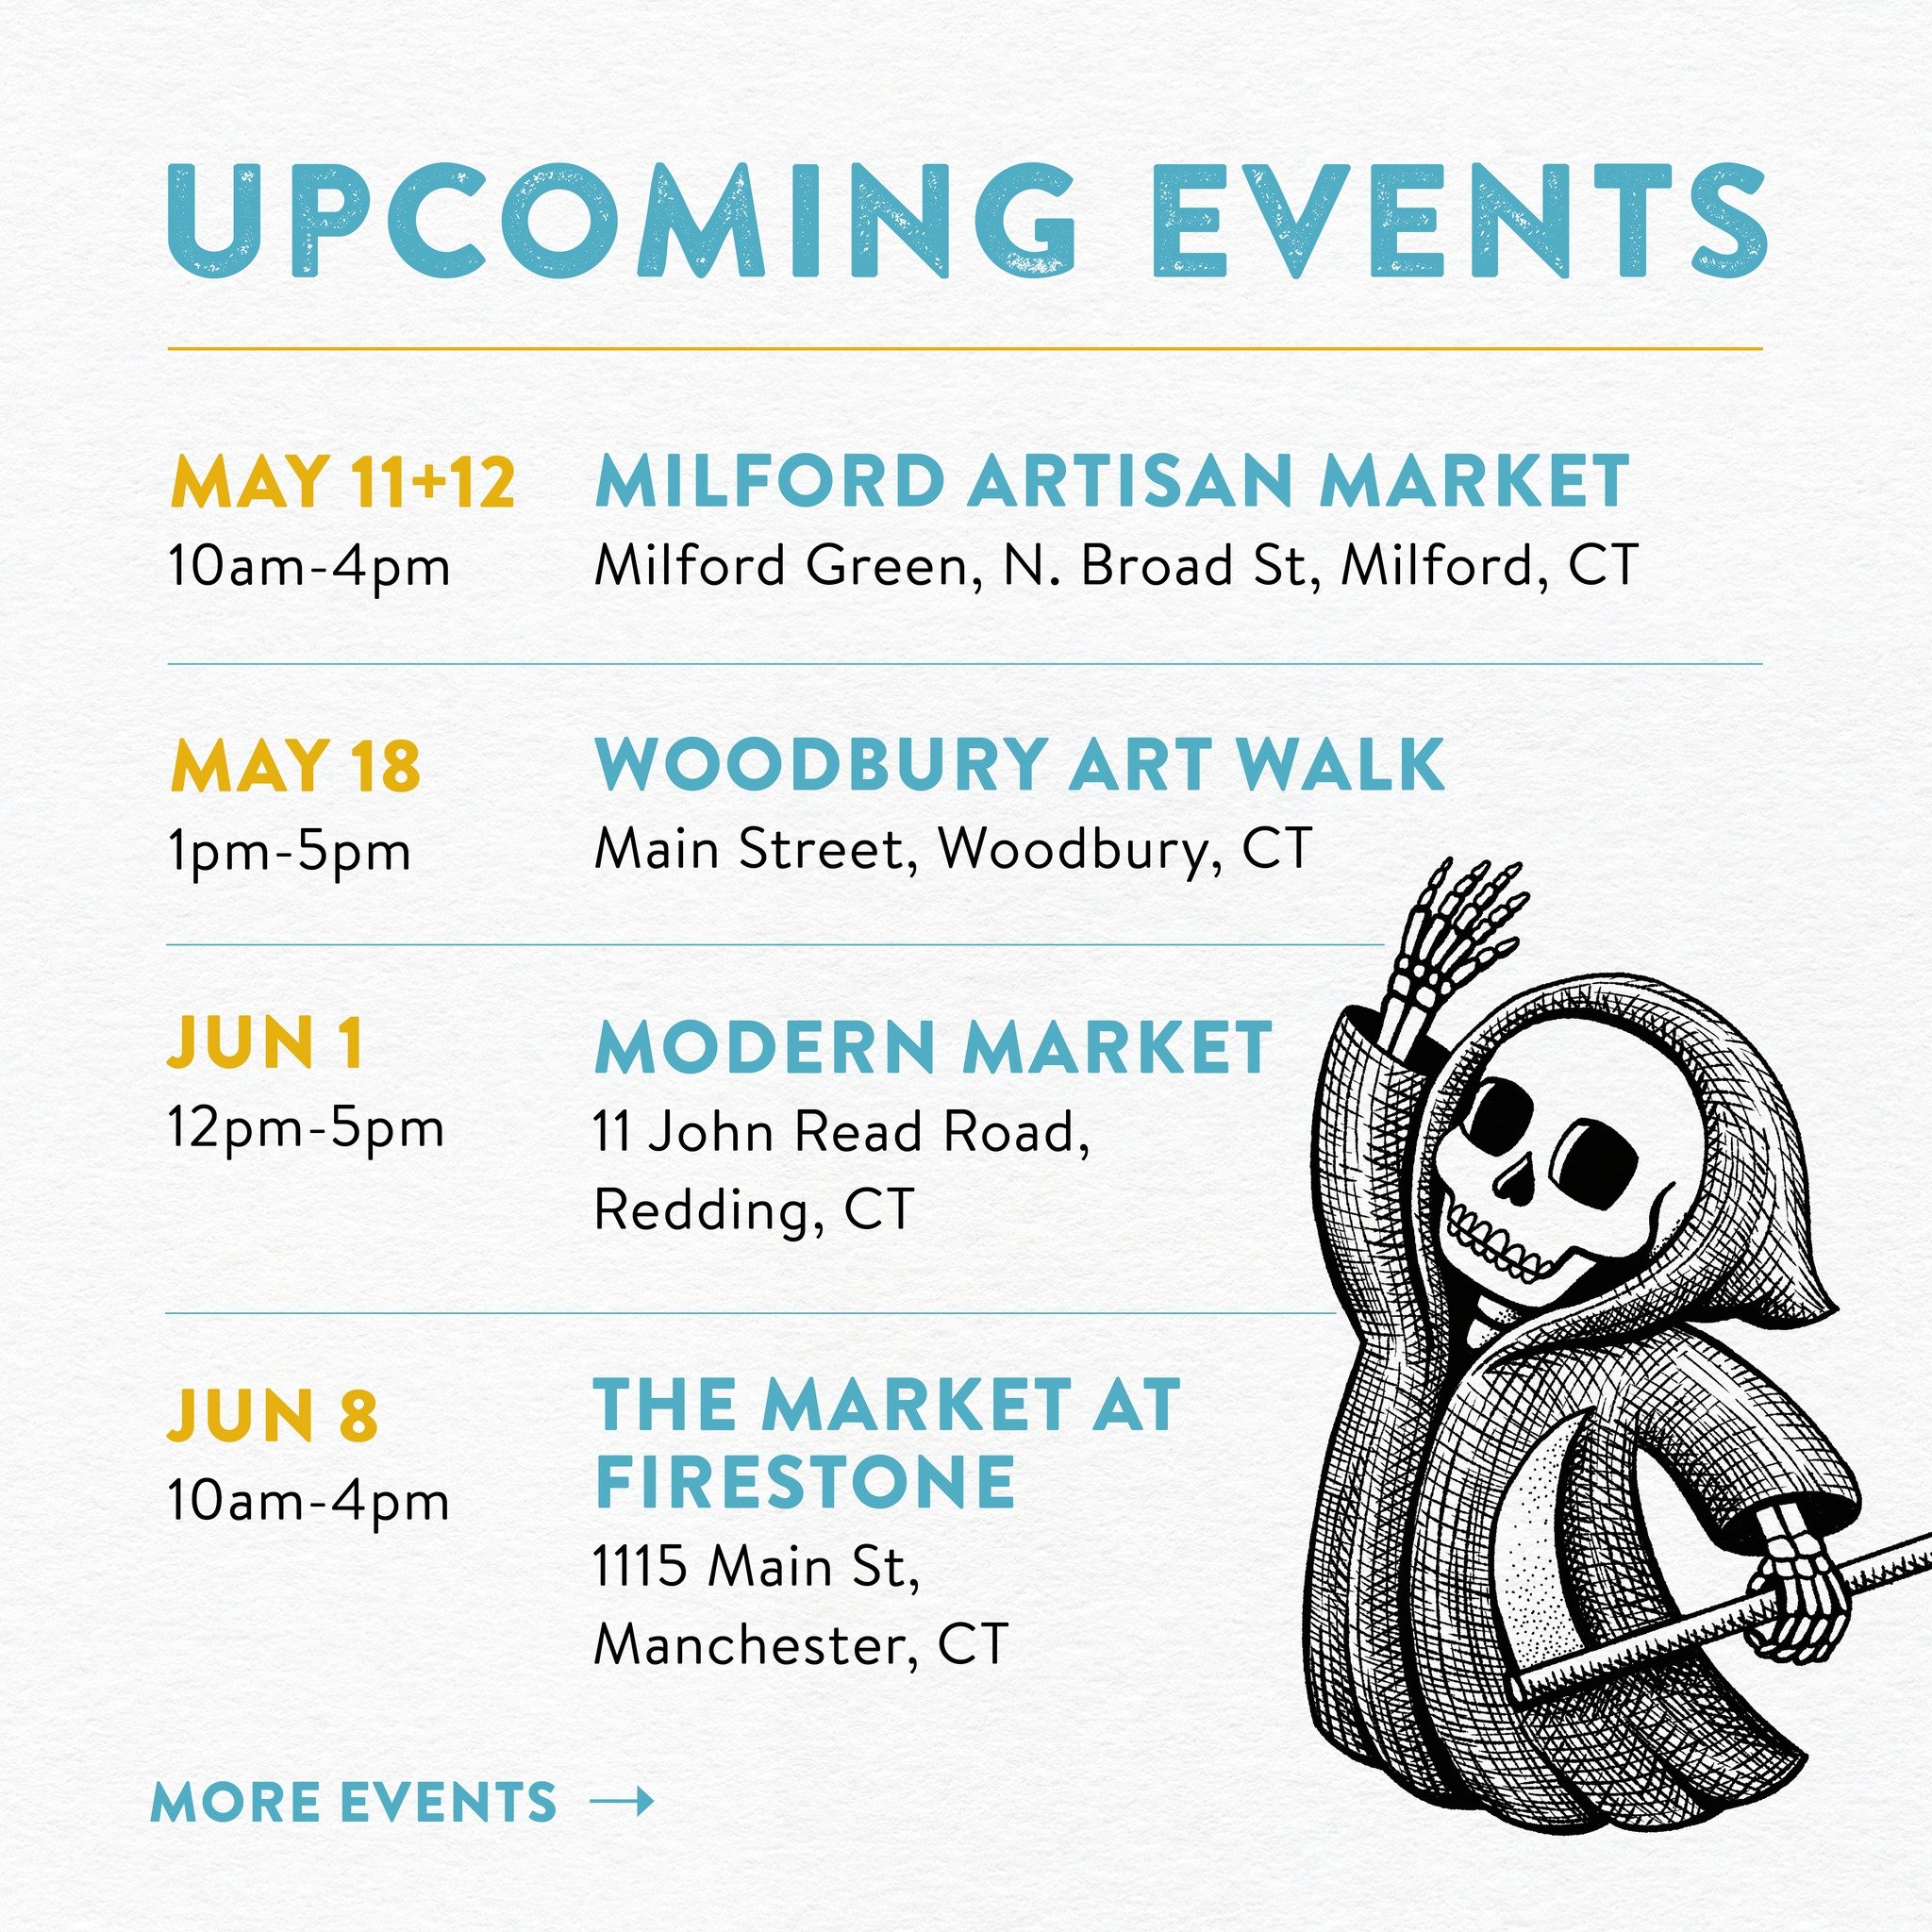 Art show season is in full swing. Selling art prints, shirts, stickers, pins, and more. Come check out some of my old favorites and new additions at the following events. ✌
.
.
.
.
.
#ctarrtist #shoplocal #ctmade #localconnecticut  #ctcreators #ctcre